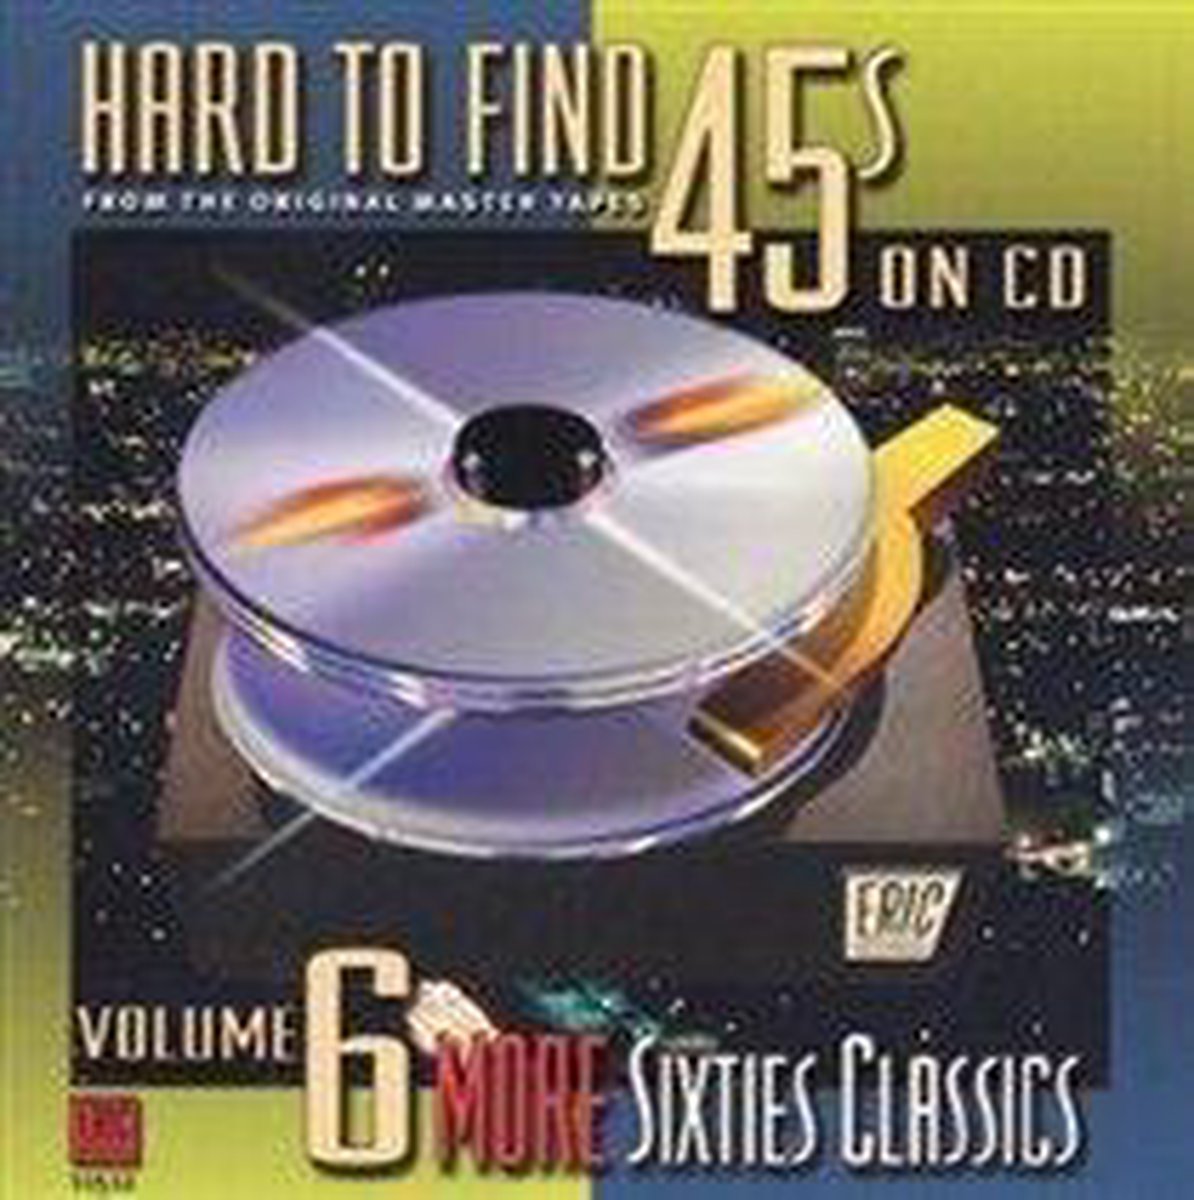 Hard To Find 45s On CD Vol. 6: More '60s Classics - various artists